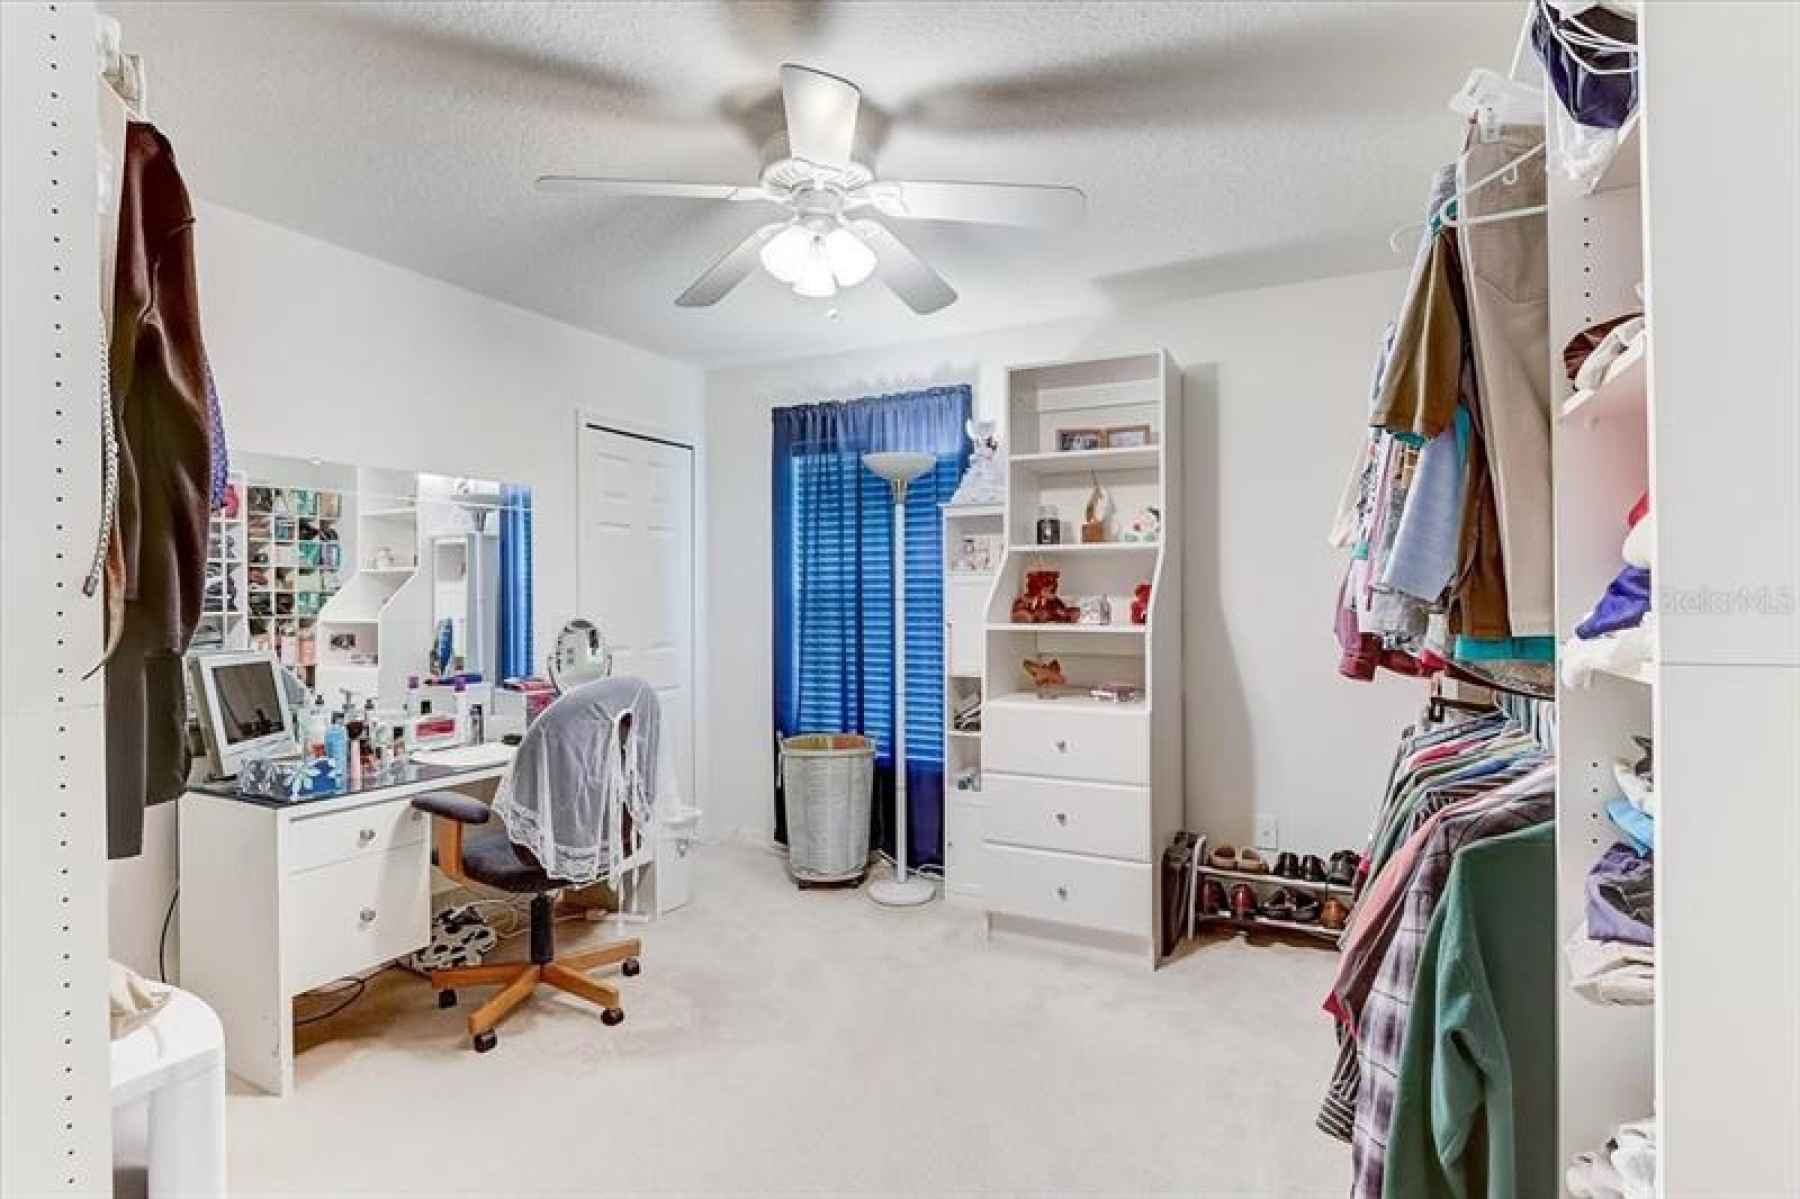 Dressing room. Has closet, could be considered an extra bedroom